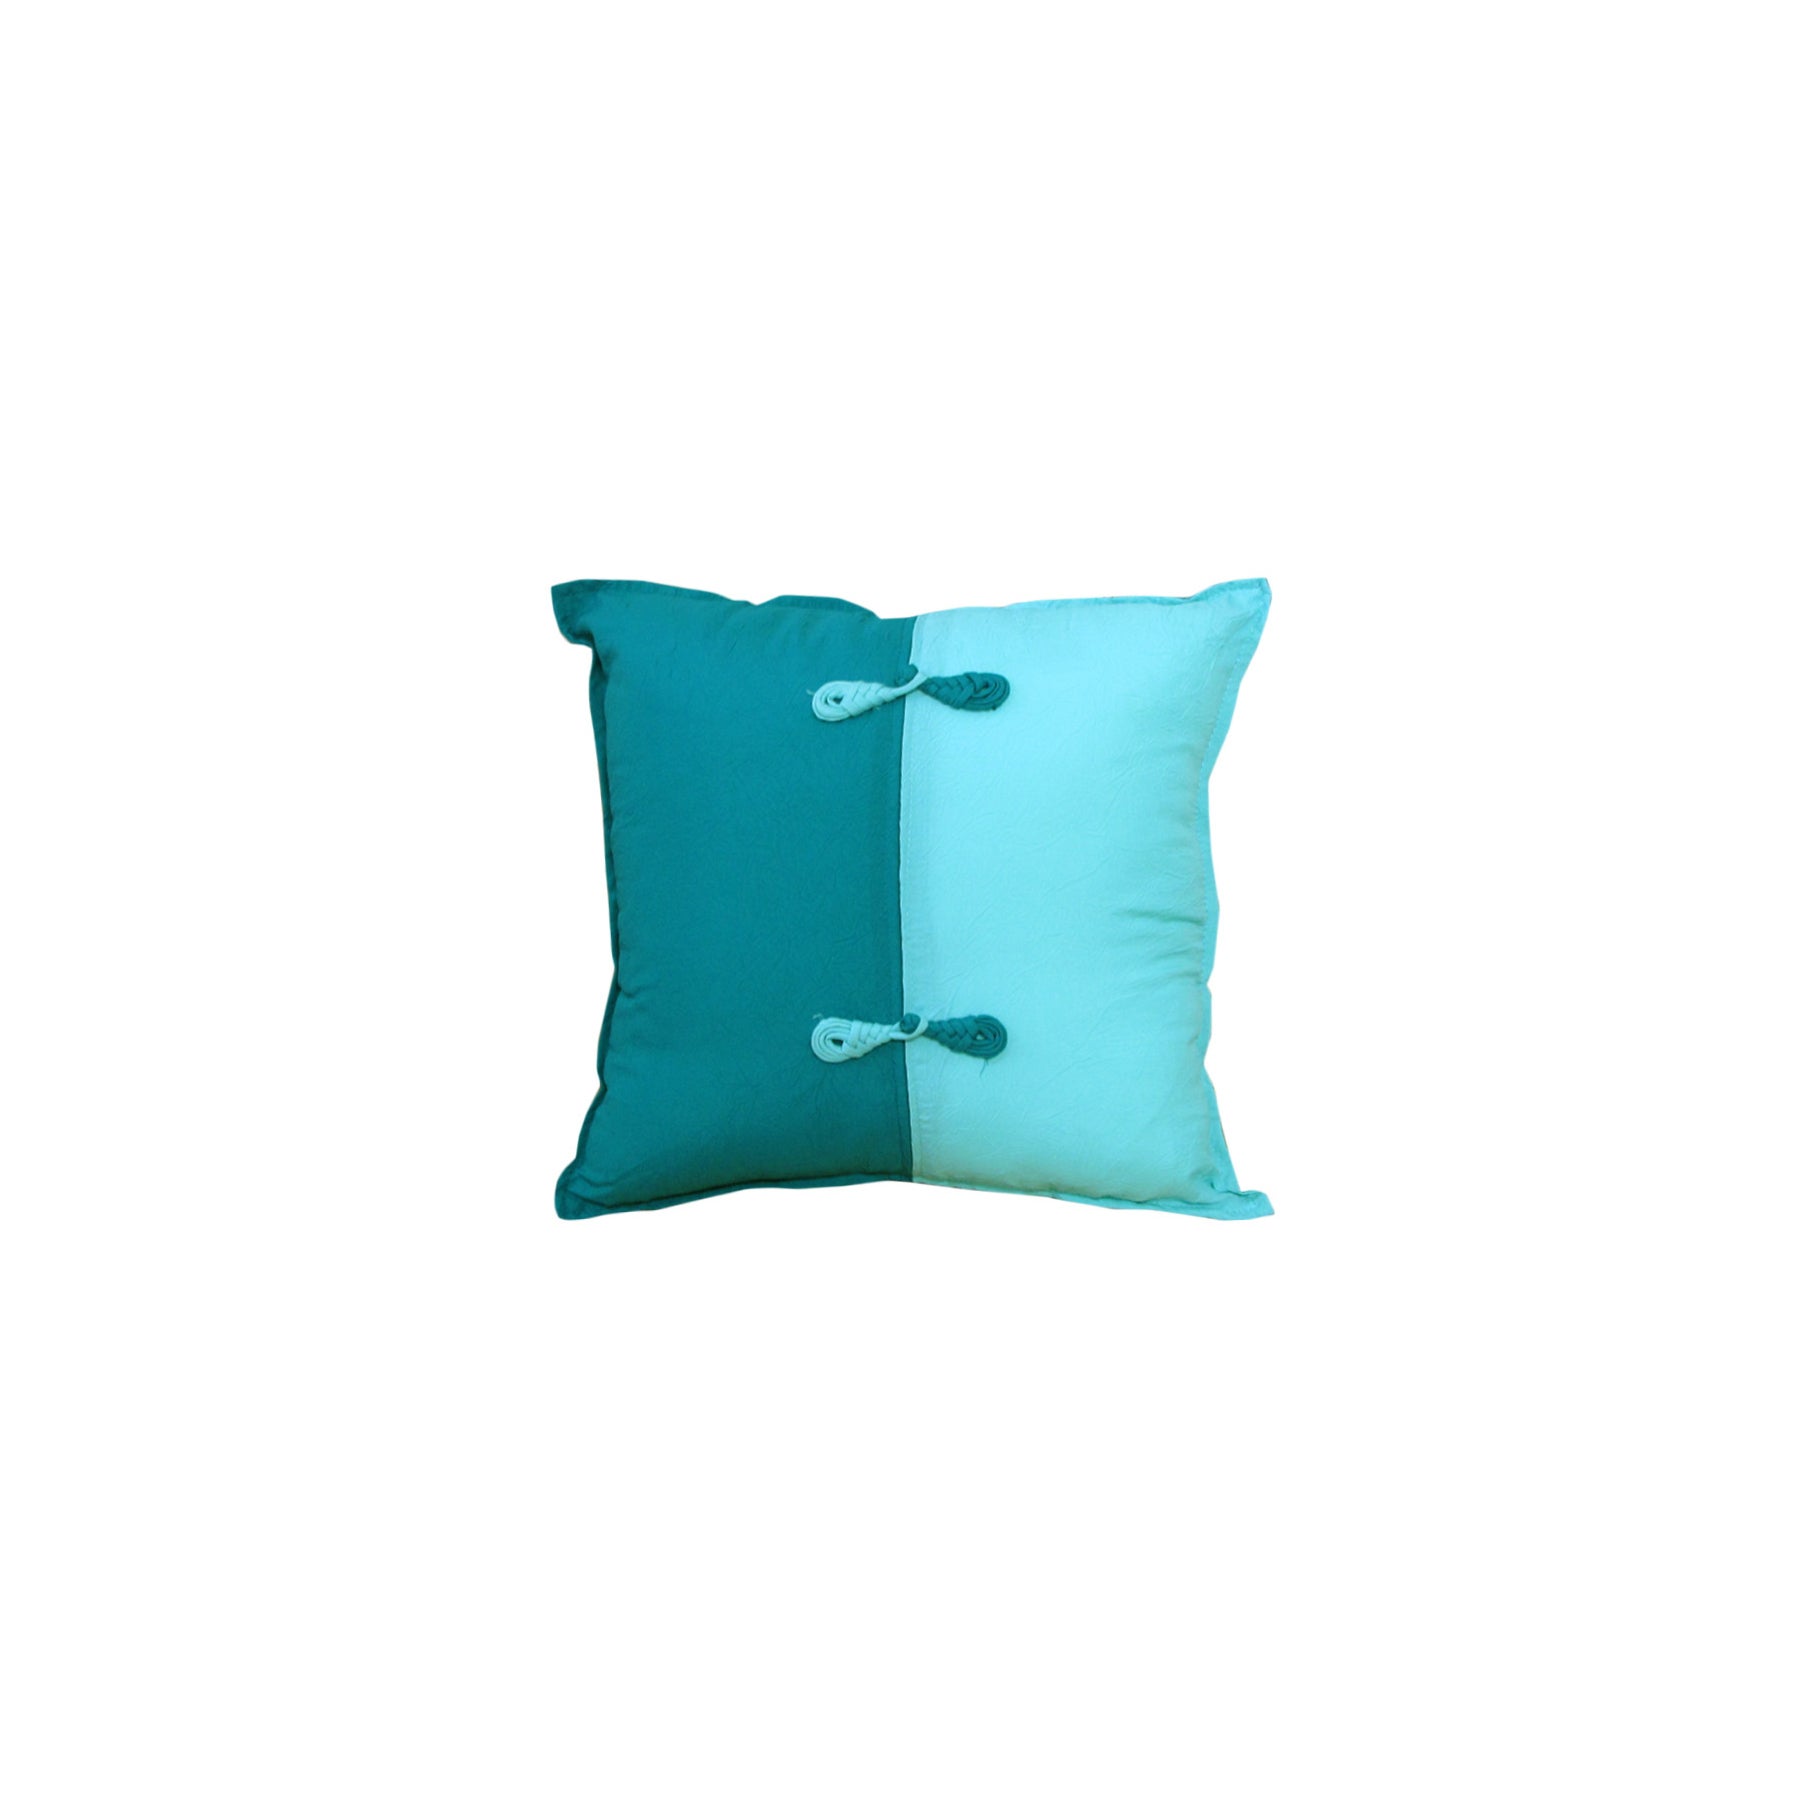 Scrunchie Petrel Cushion Cover by Phase 2